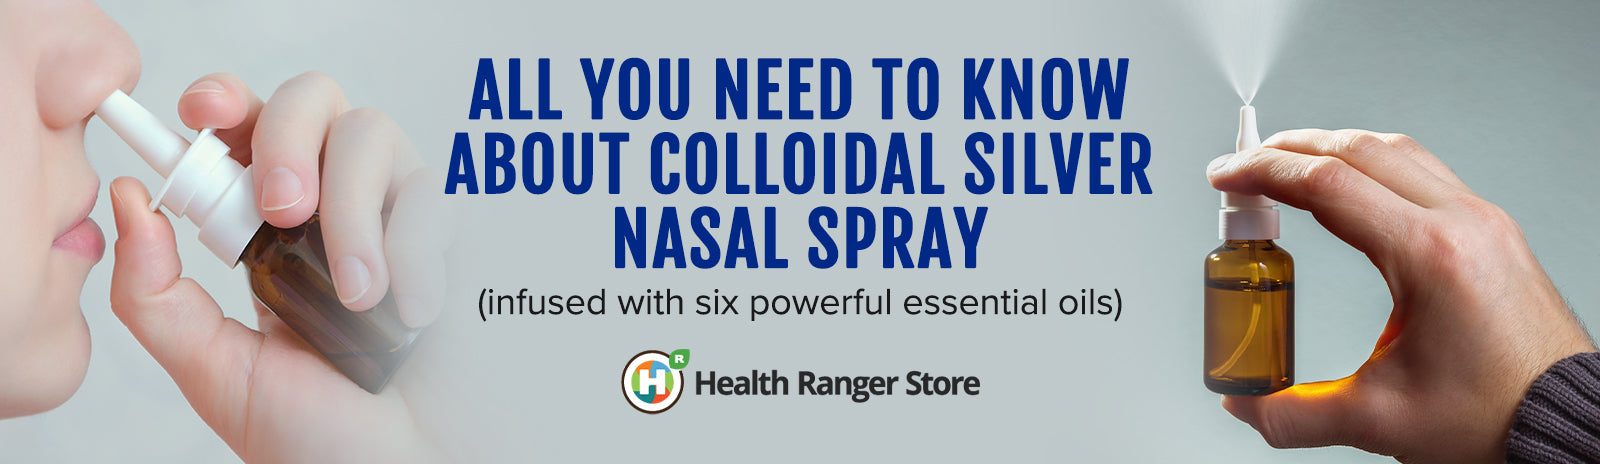 All you need to know about colloidal silver nasal spray